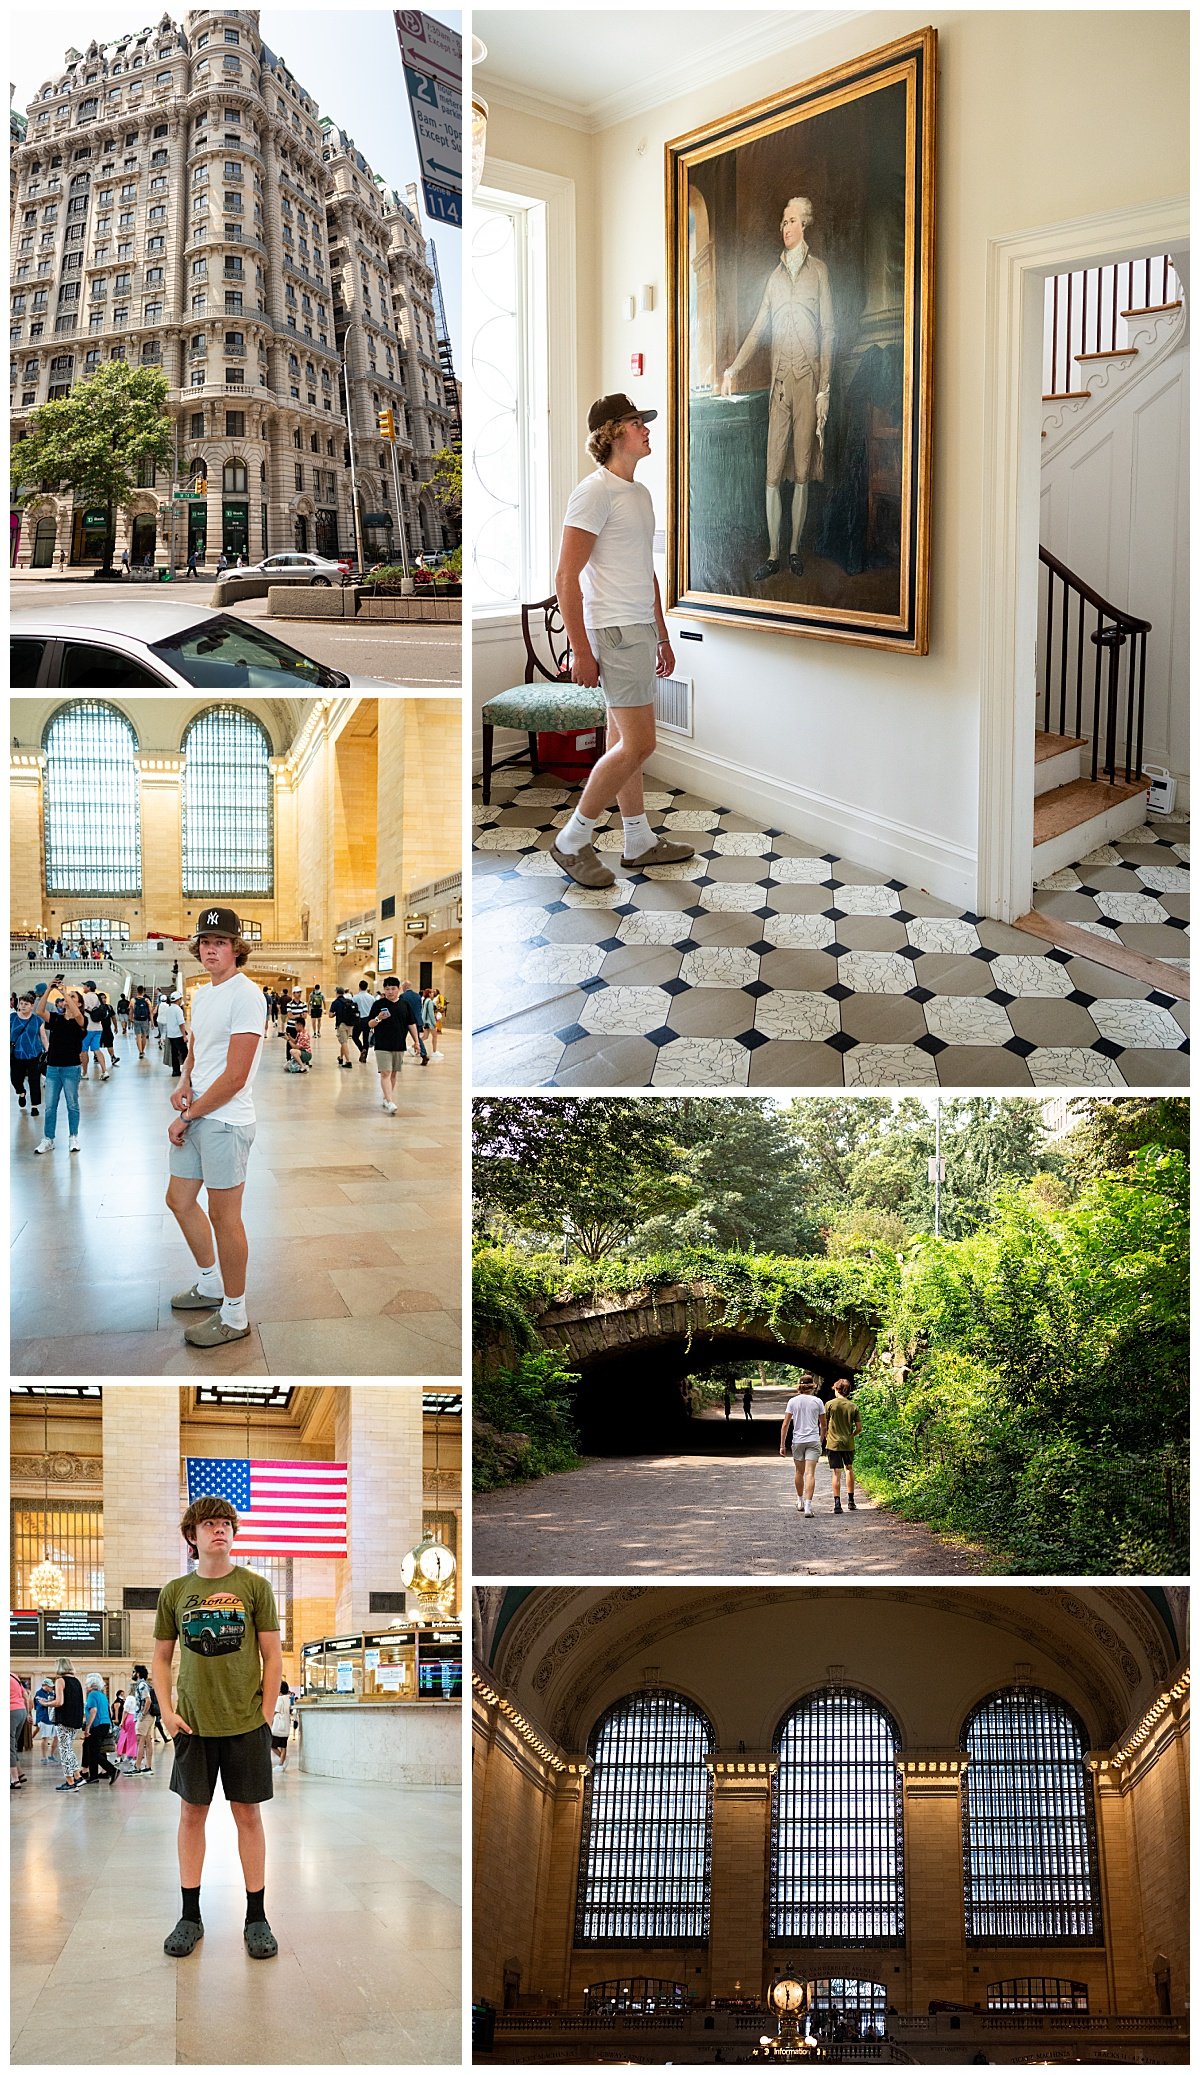 Photos depict two teen boys touring NYC with their North Dakota Photographer mother, exploring downtown architecture and Grand Central Station.